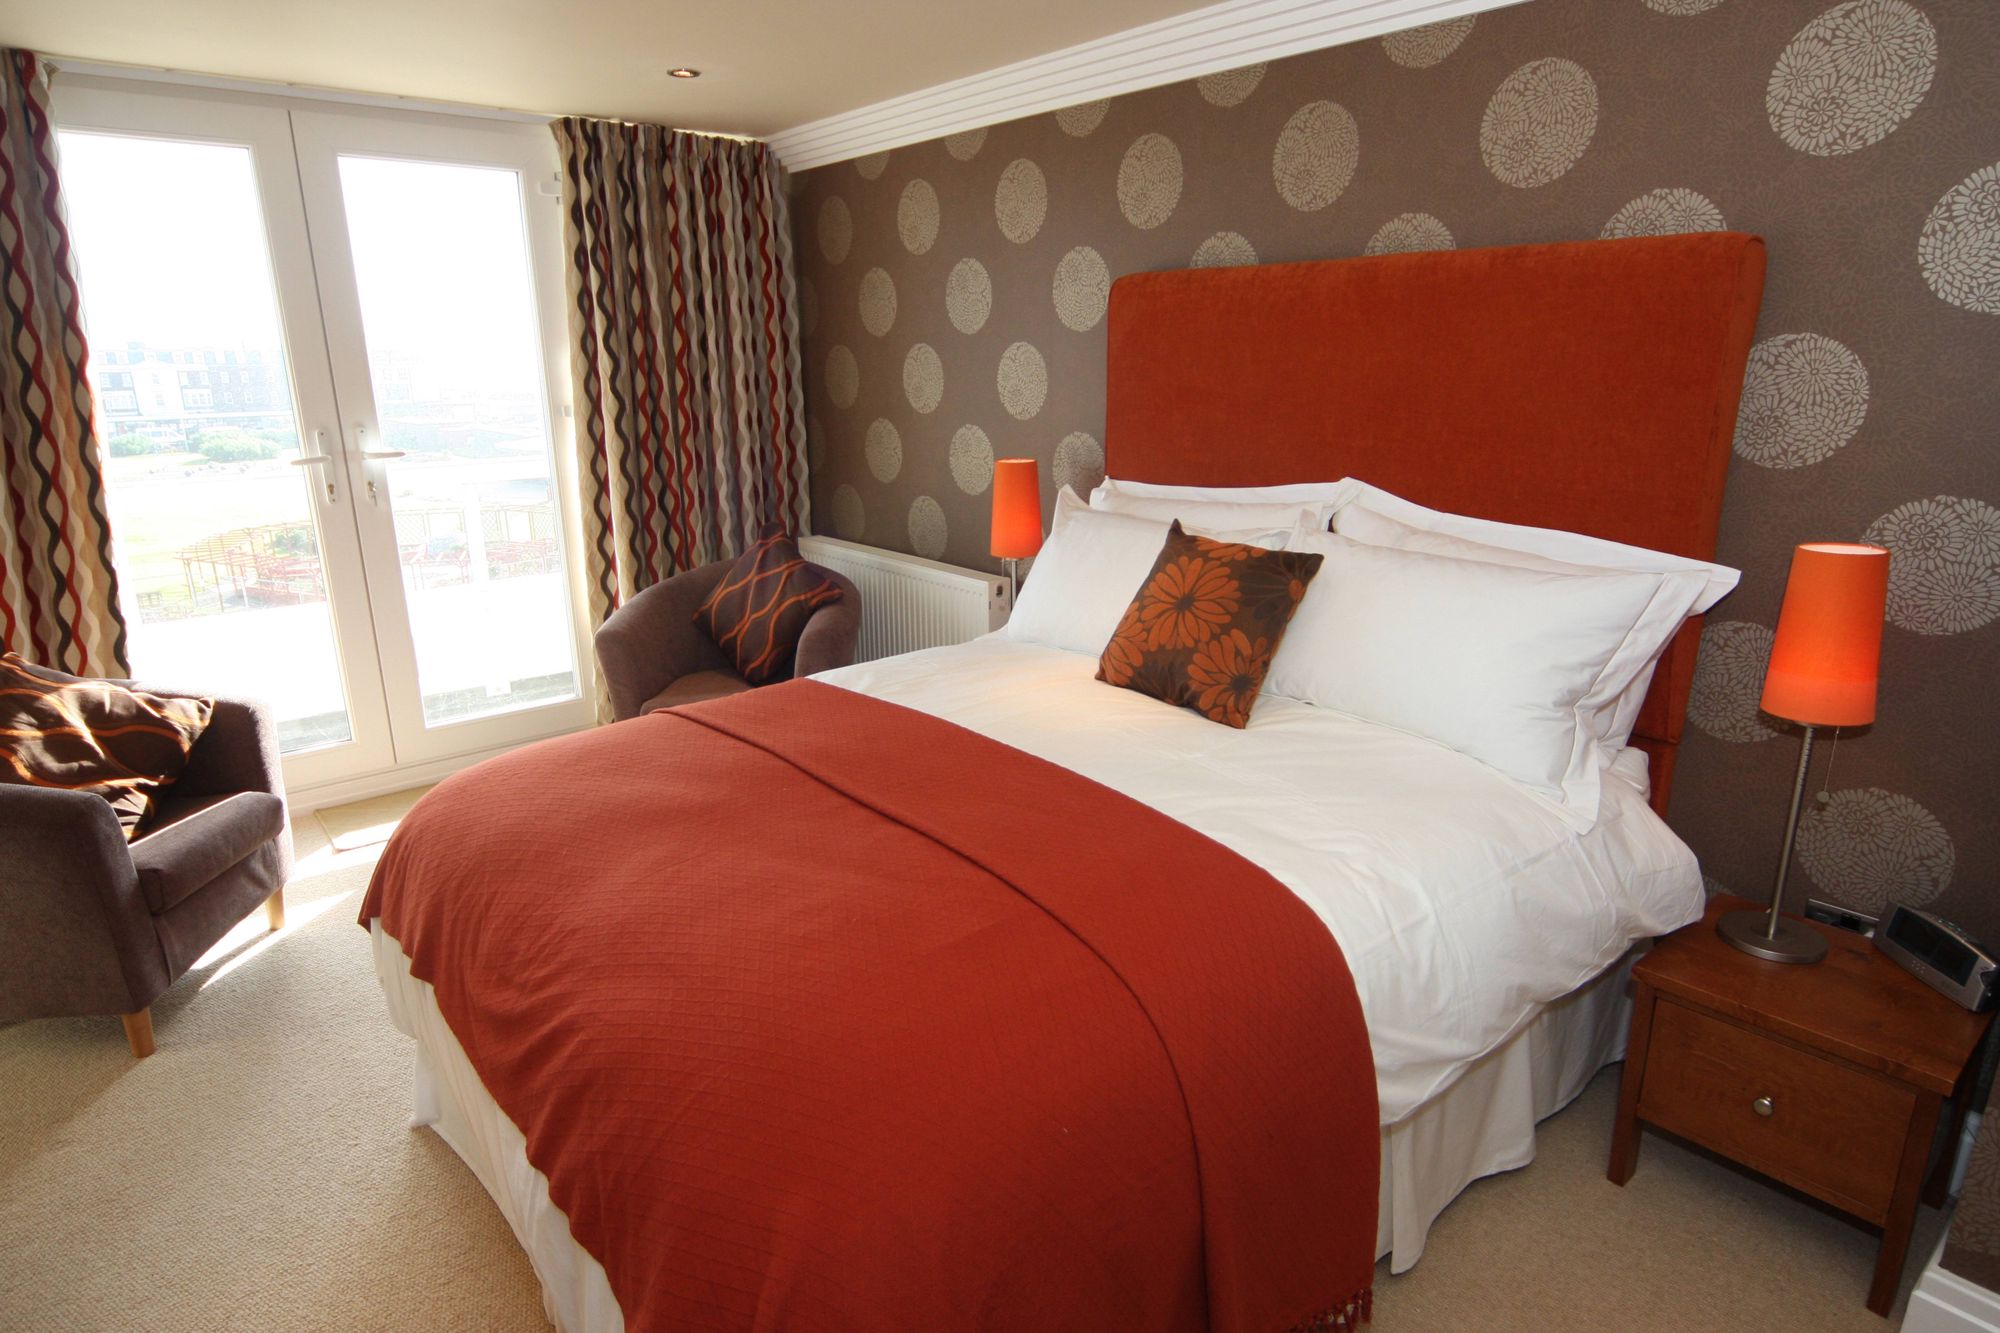 Hotels in Lancashire holidays at Cool Places